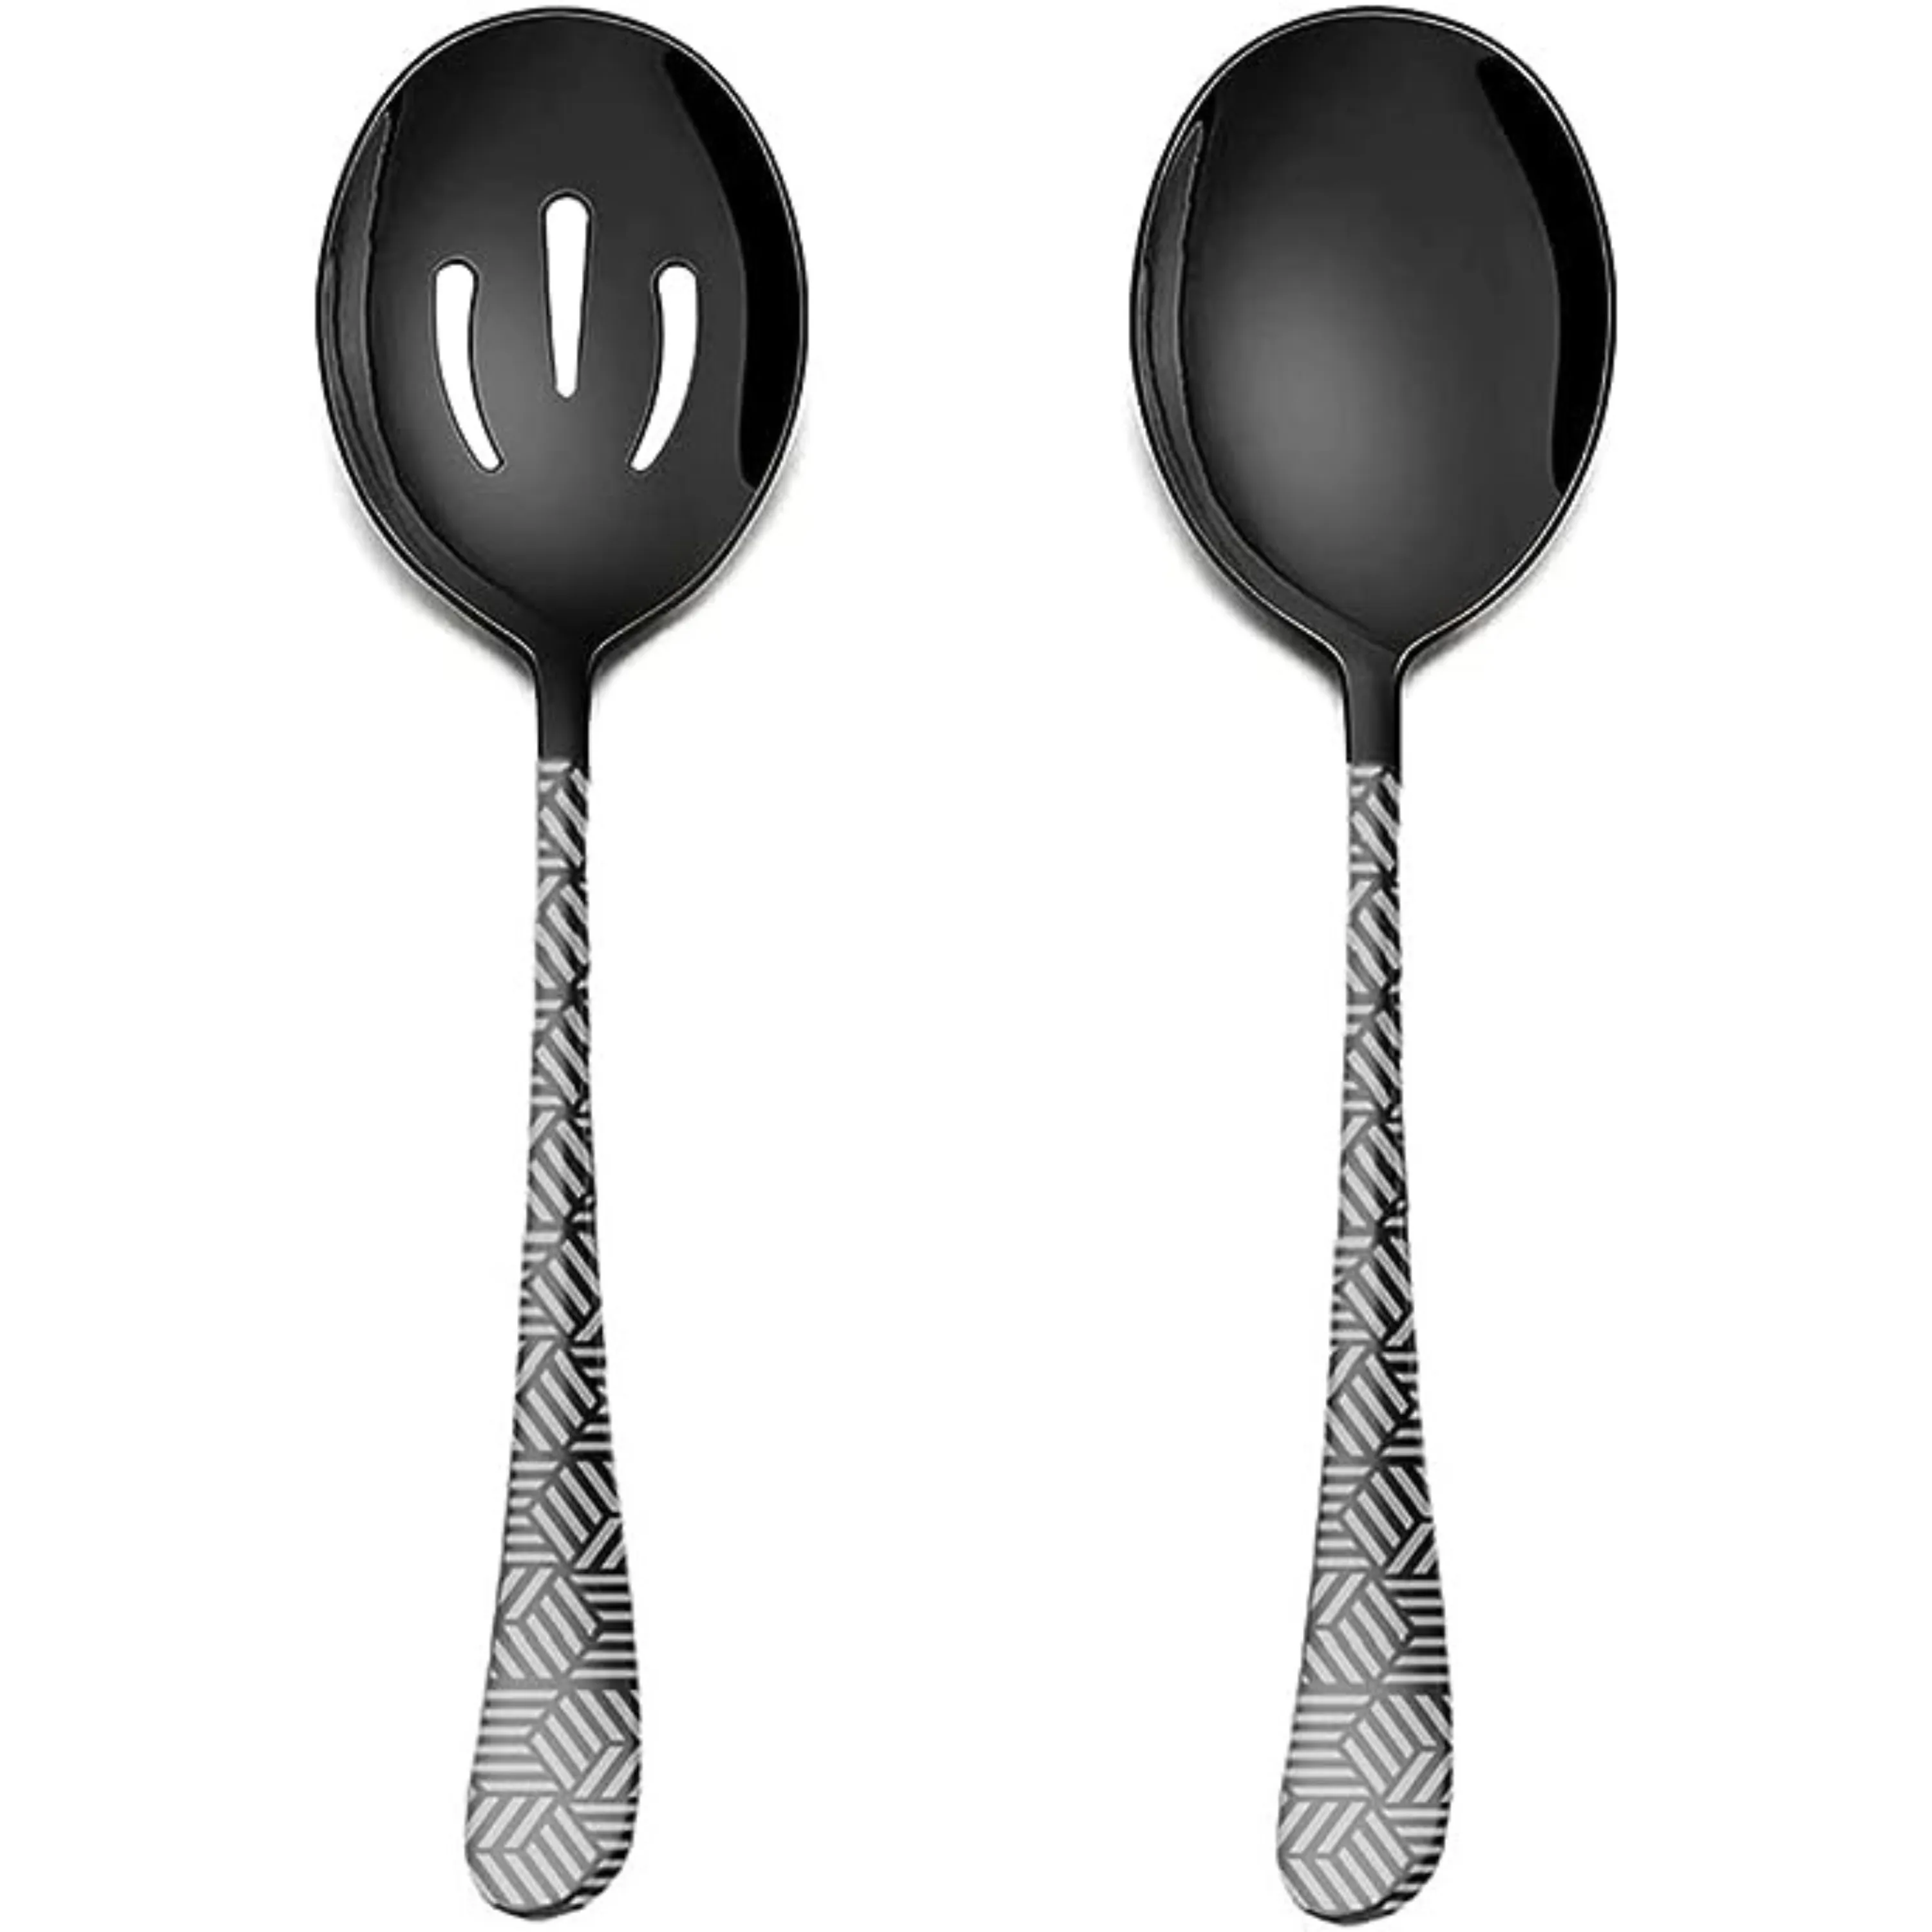 Casual Custom Stainless Steel Spoon Good Quality Server or Salad Spoons Home & Restaurant Kitchenware Tools Server Utensils Set